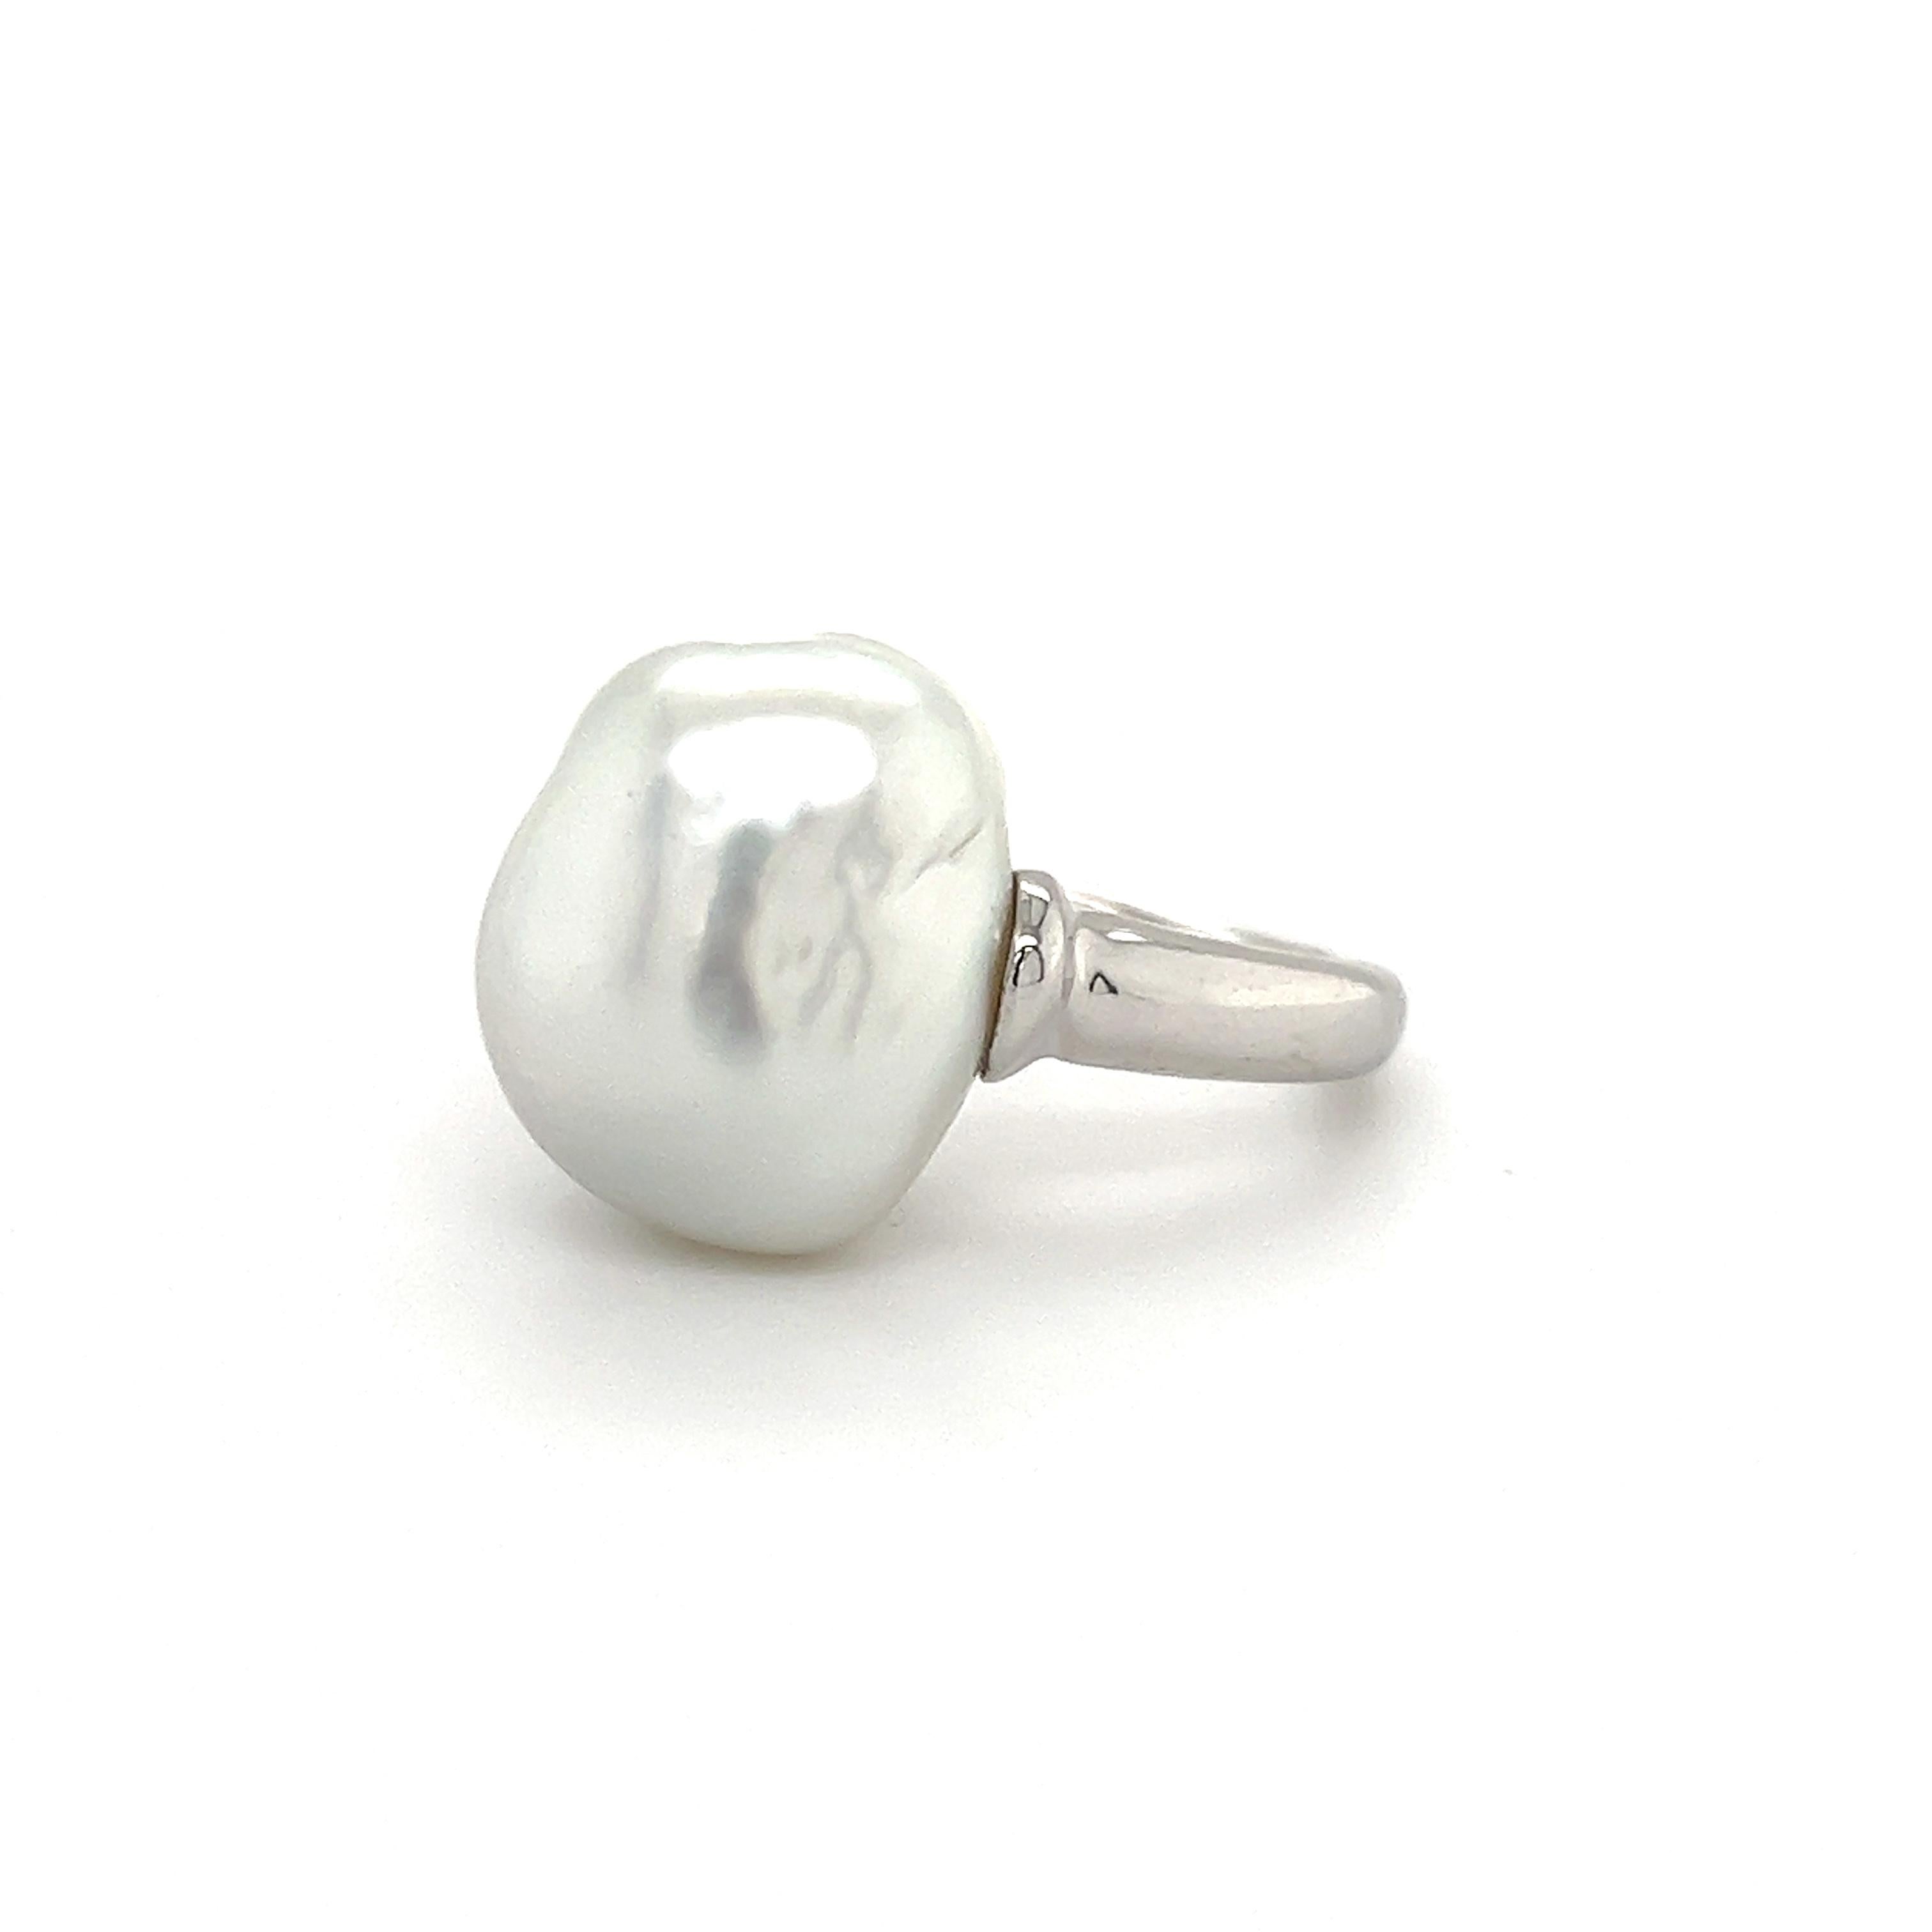 Beautiful design seen on this elegant Mikimoto ring. The highlight of the ring is one white baroque pearl gemstone that is tension set. The pearl appears to be floating in air, although simple, this ring is sure to grab attention whenever worn.  The